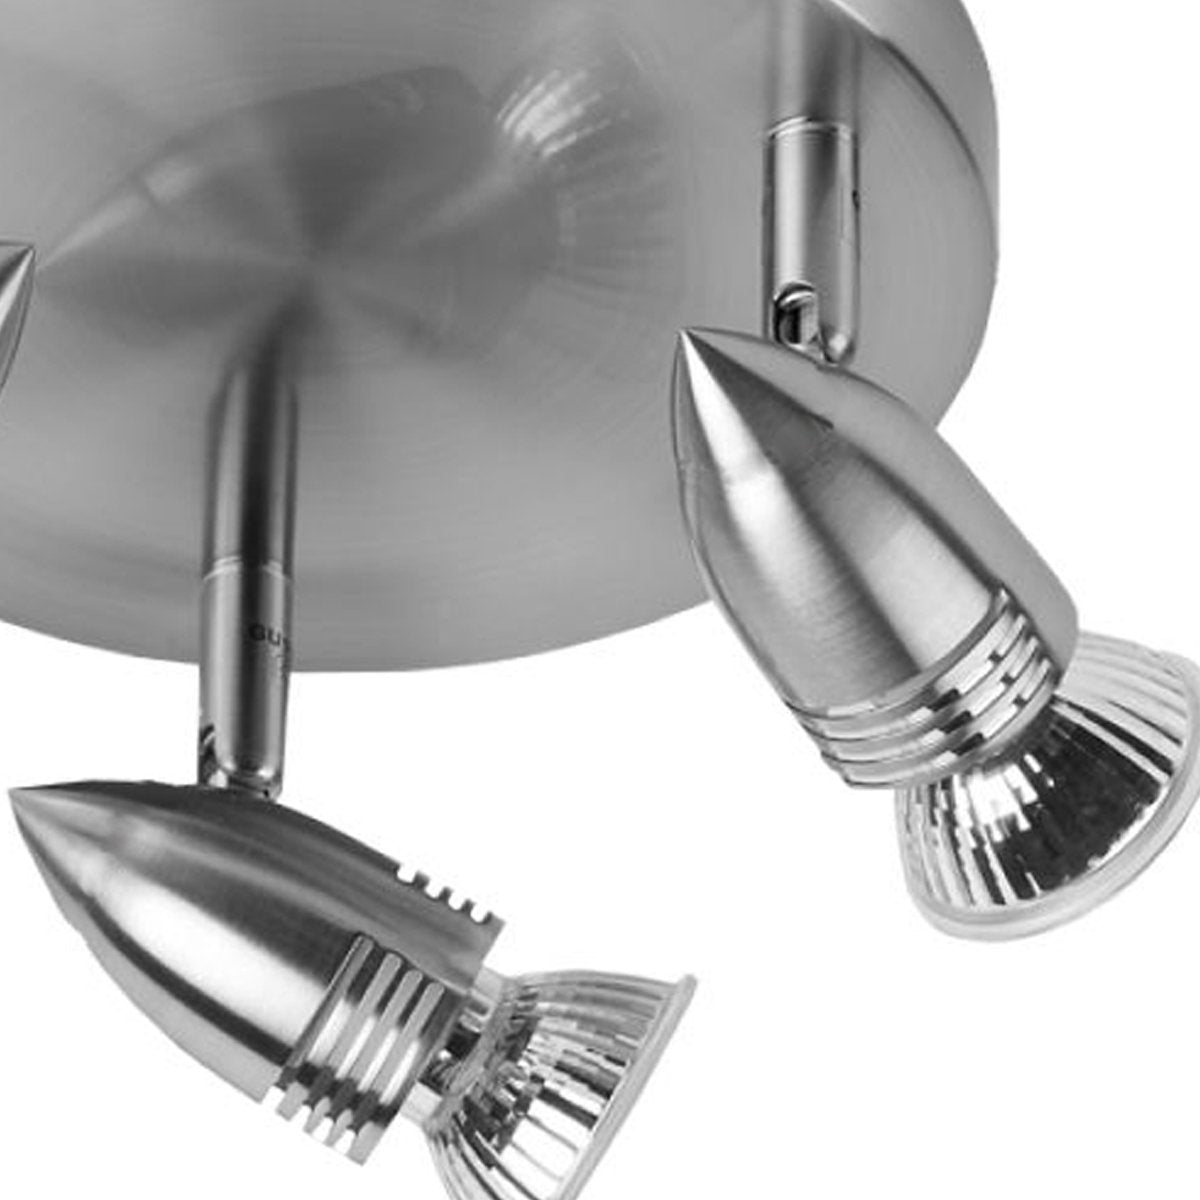 CGC LEAH Brushed Chrome Triple Round Plate Ceiling Spotlights